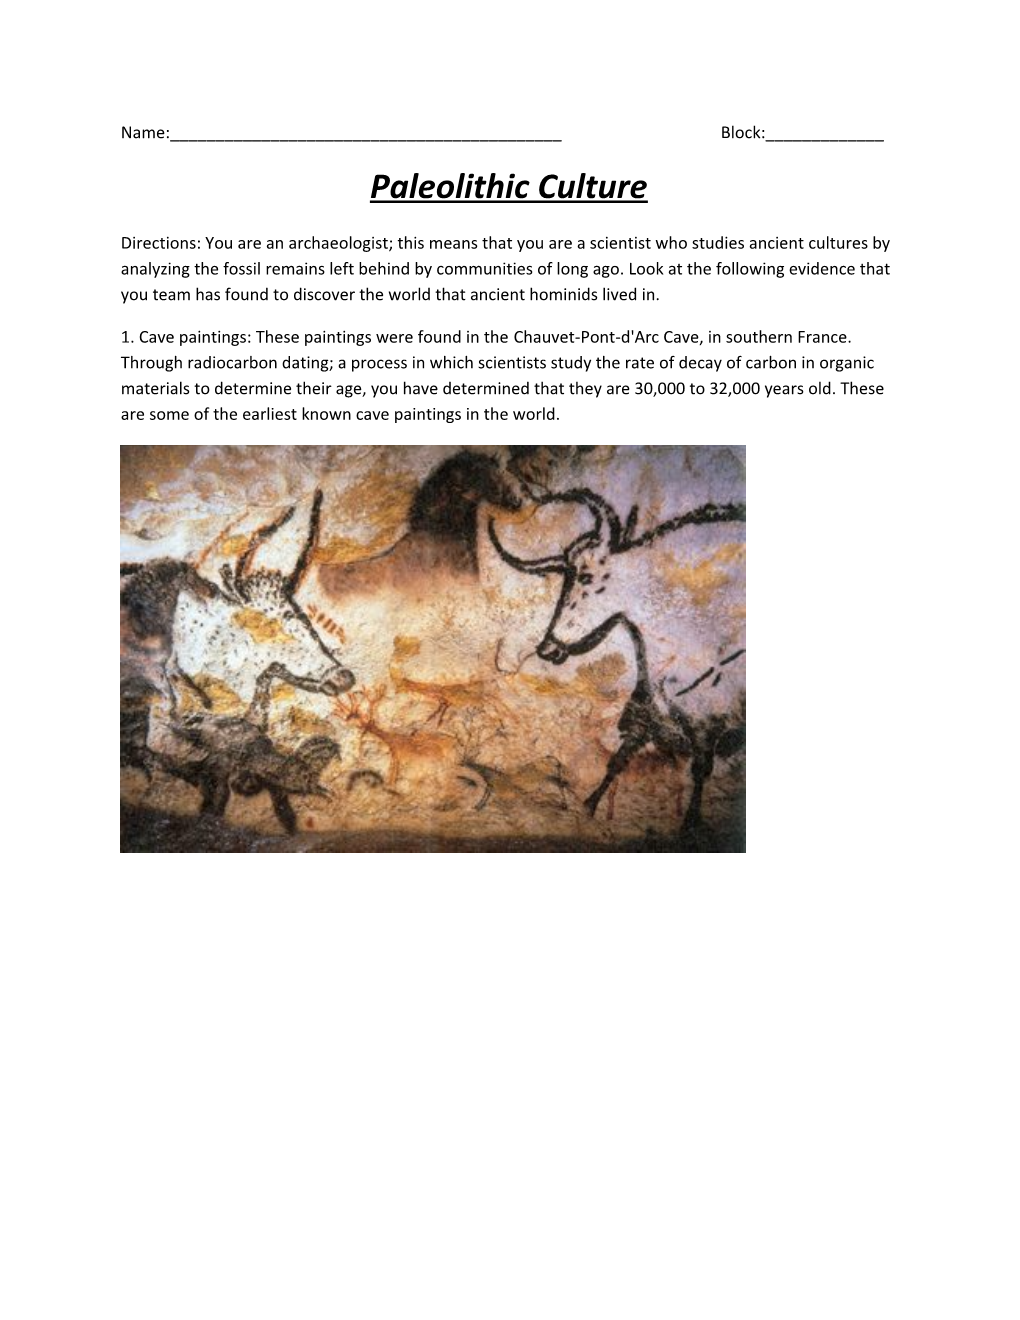 Paleolithic Culture